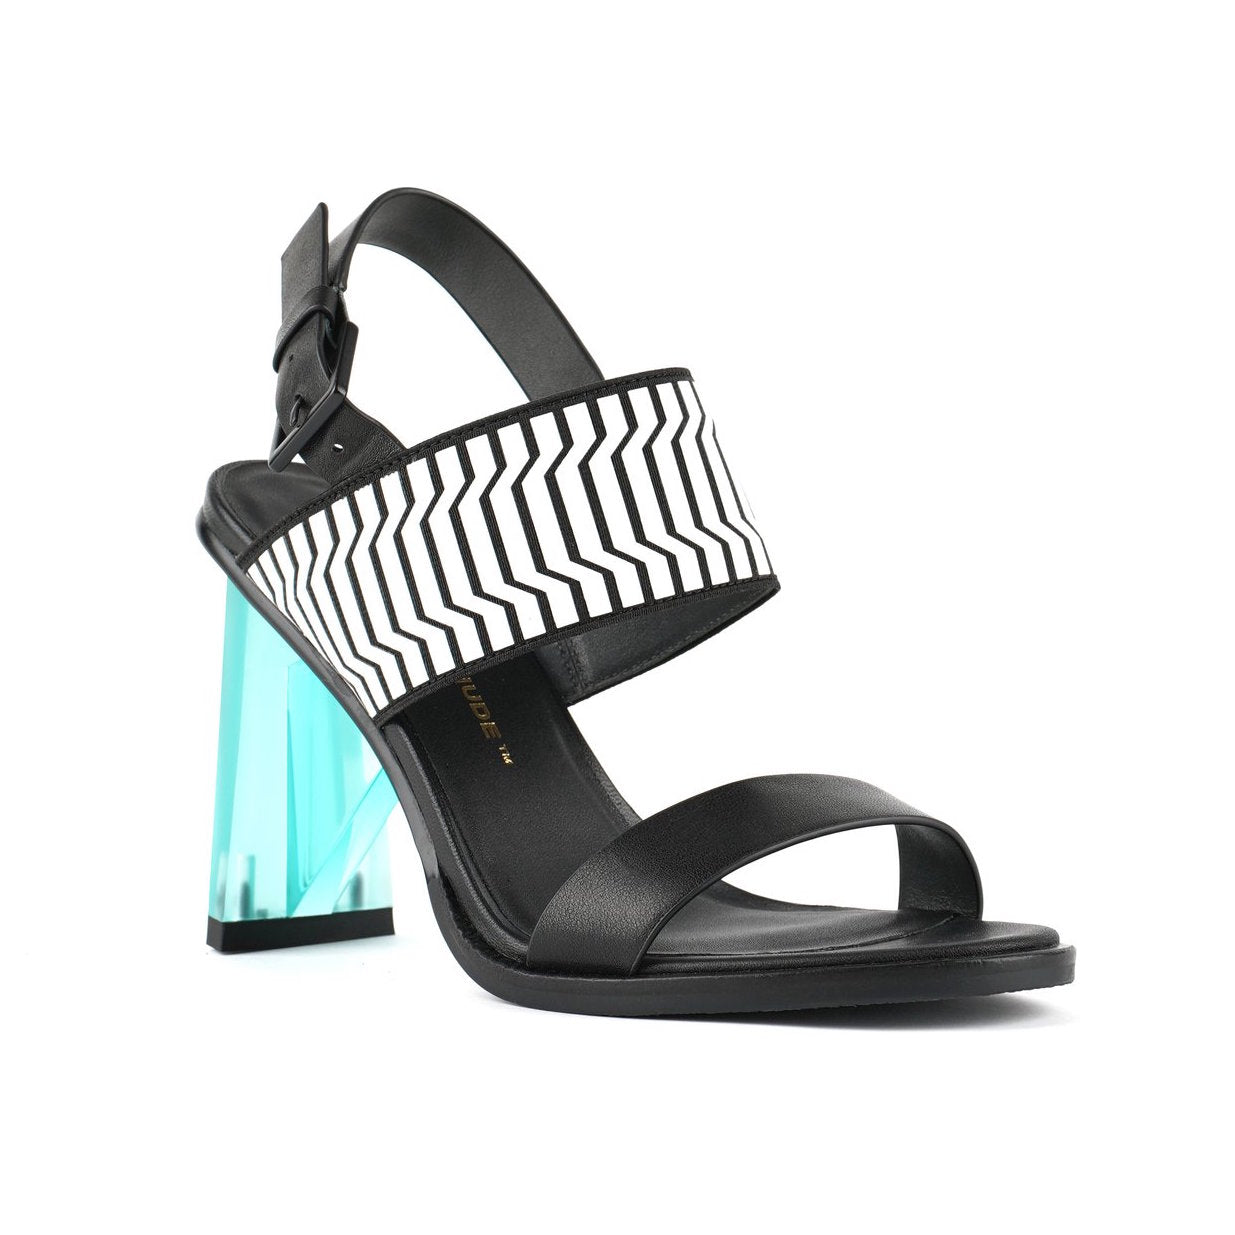 Outer front view of the united nude spark sandal hi II. This high heel has a strap over the instep and a strap over the toes. This shoe is black with a blue heel and it has an adjustable buckle strap behind the heel.